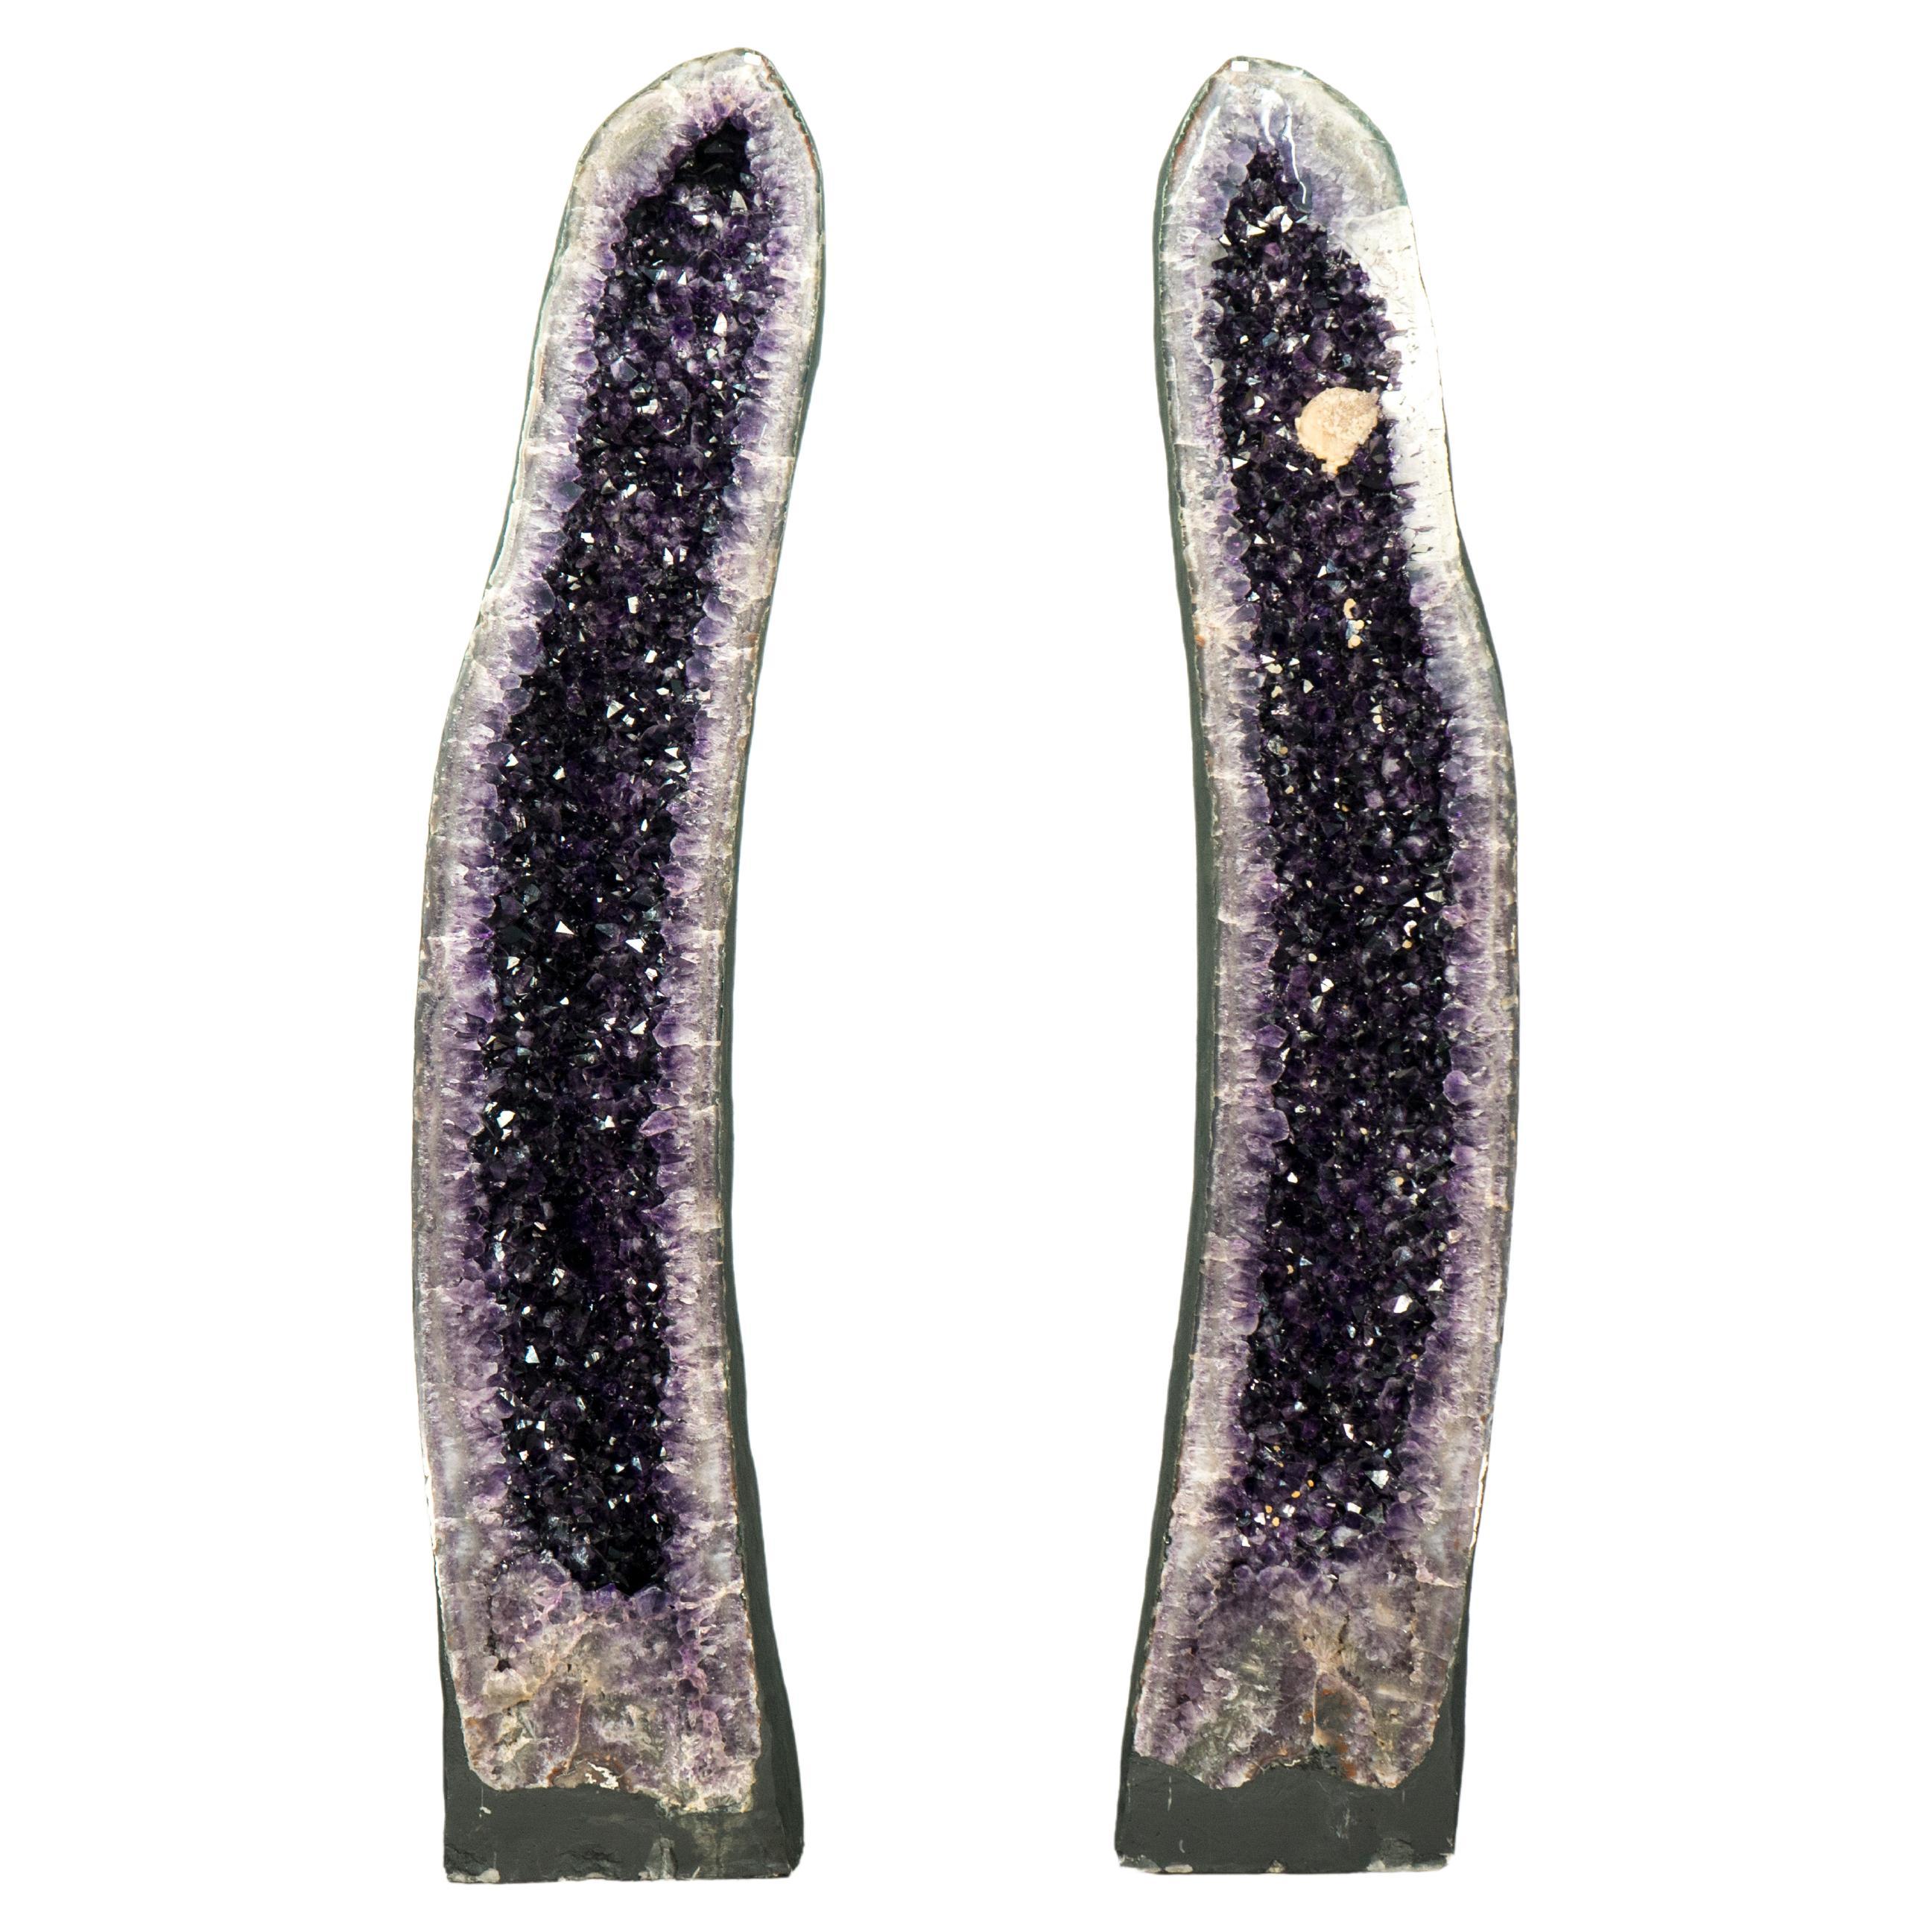 Pair of High-Grade Giant Amethyst Cathedral Geodes with Calcite - 6 Ft Tall For Sale